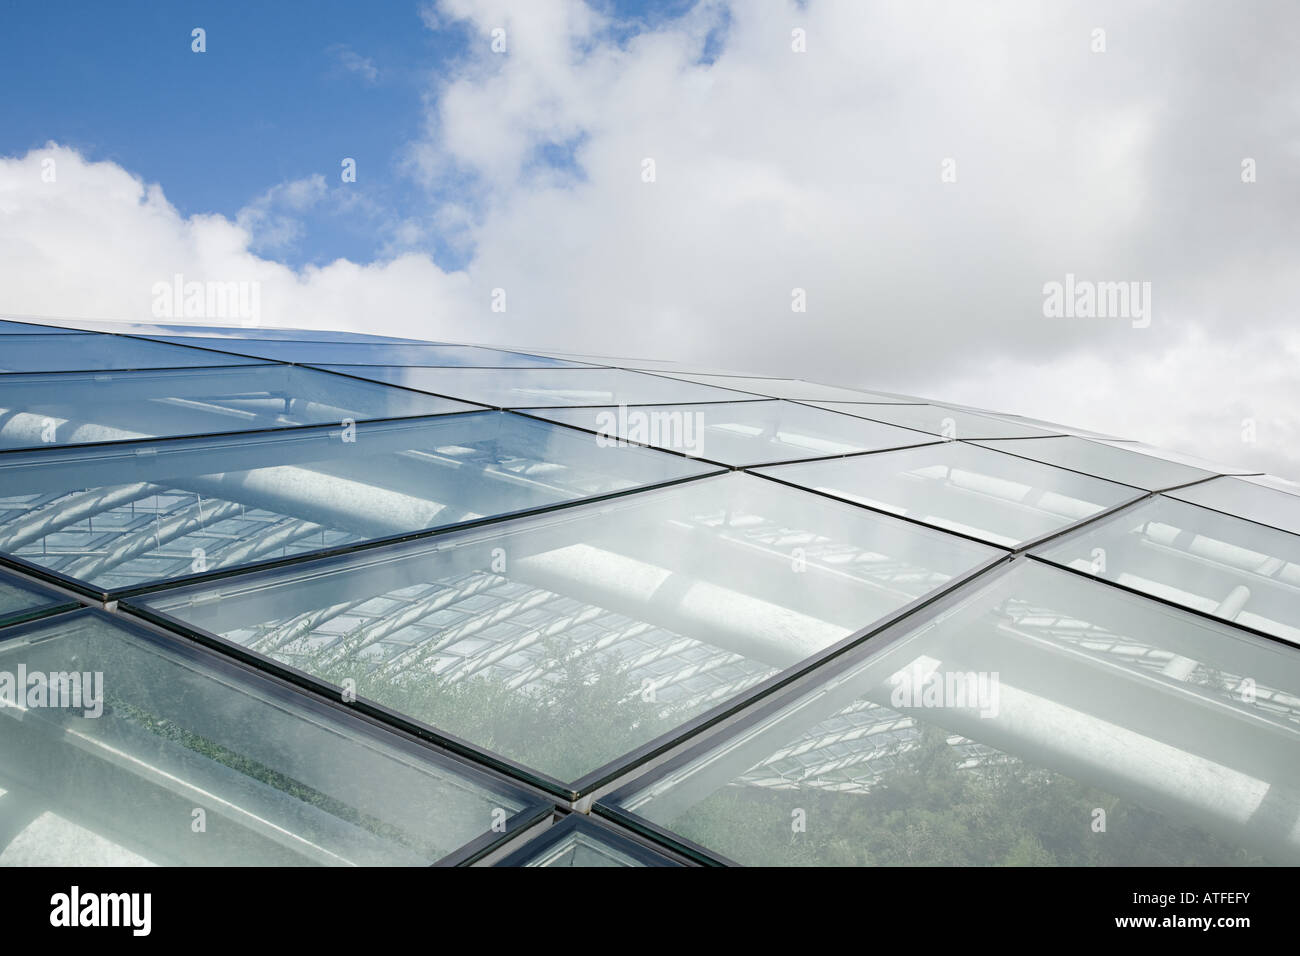 Roof of a large greenhouse Stock Photo